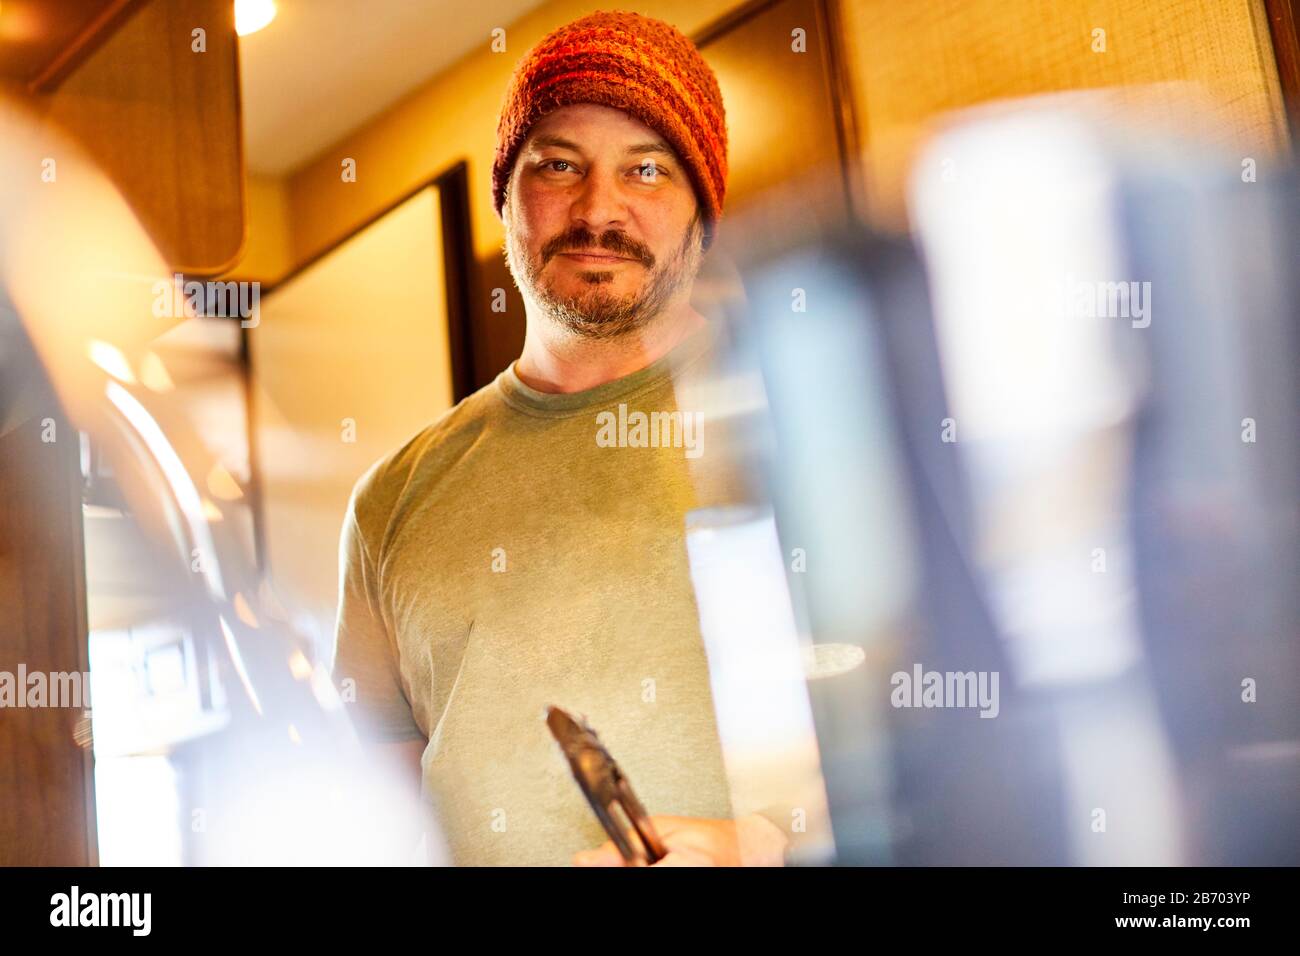 A candid portrait of a middle age man in his forties. Stock Photo